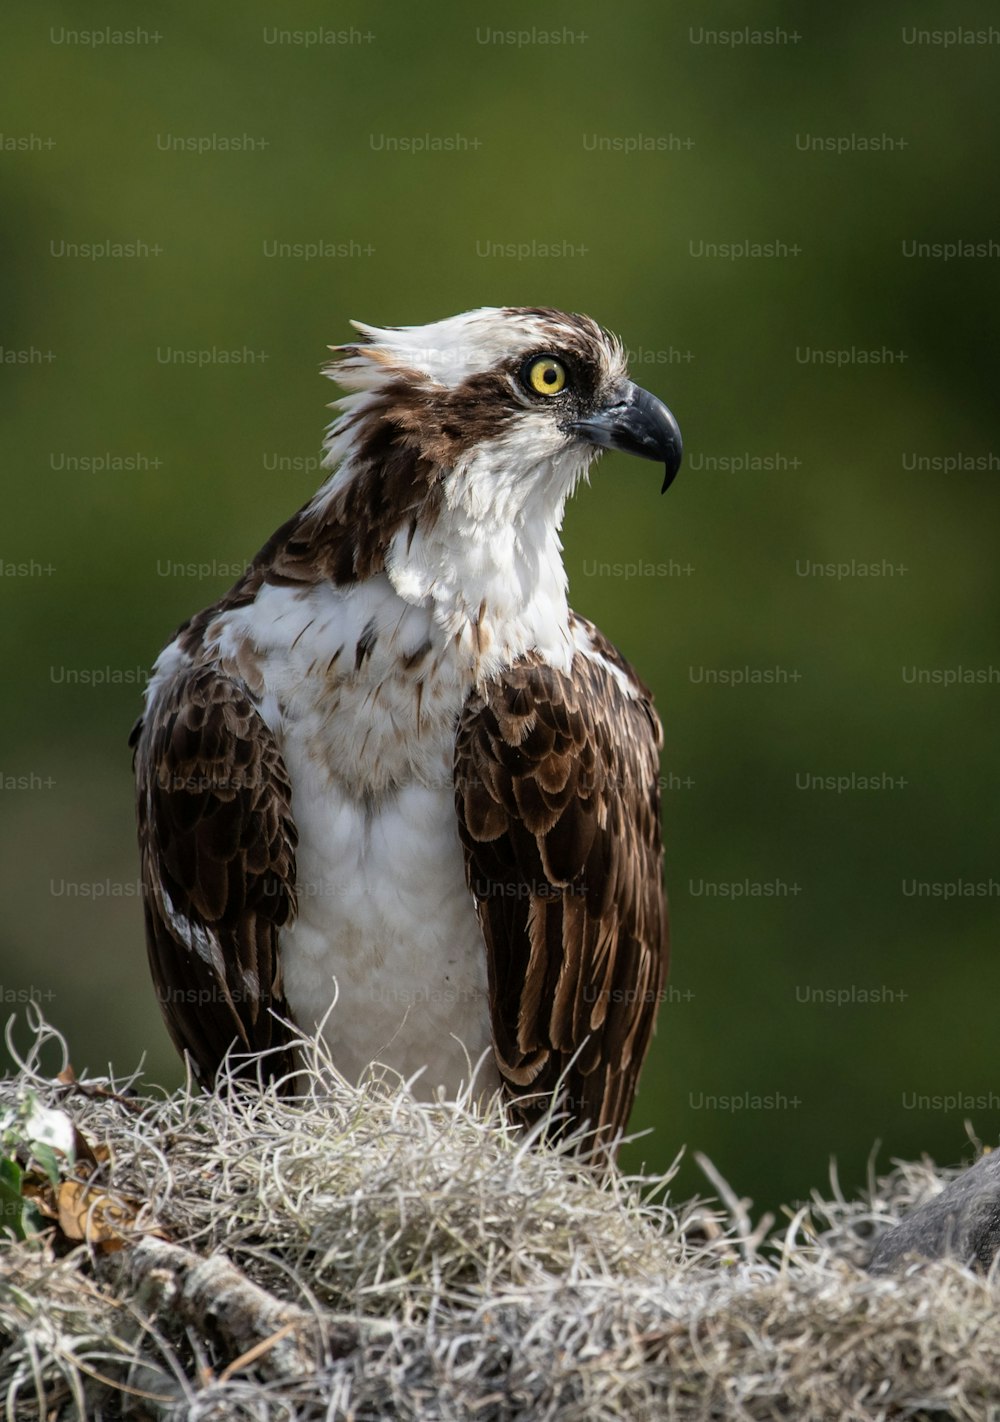 An osprey in Southern Florida